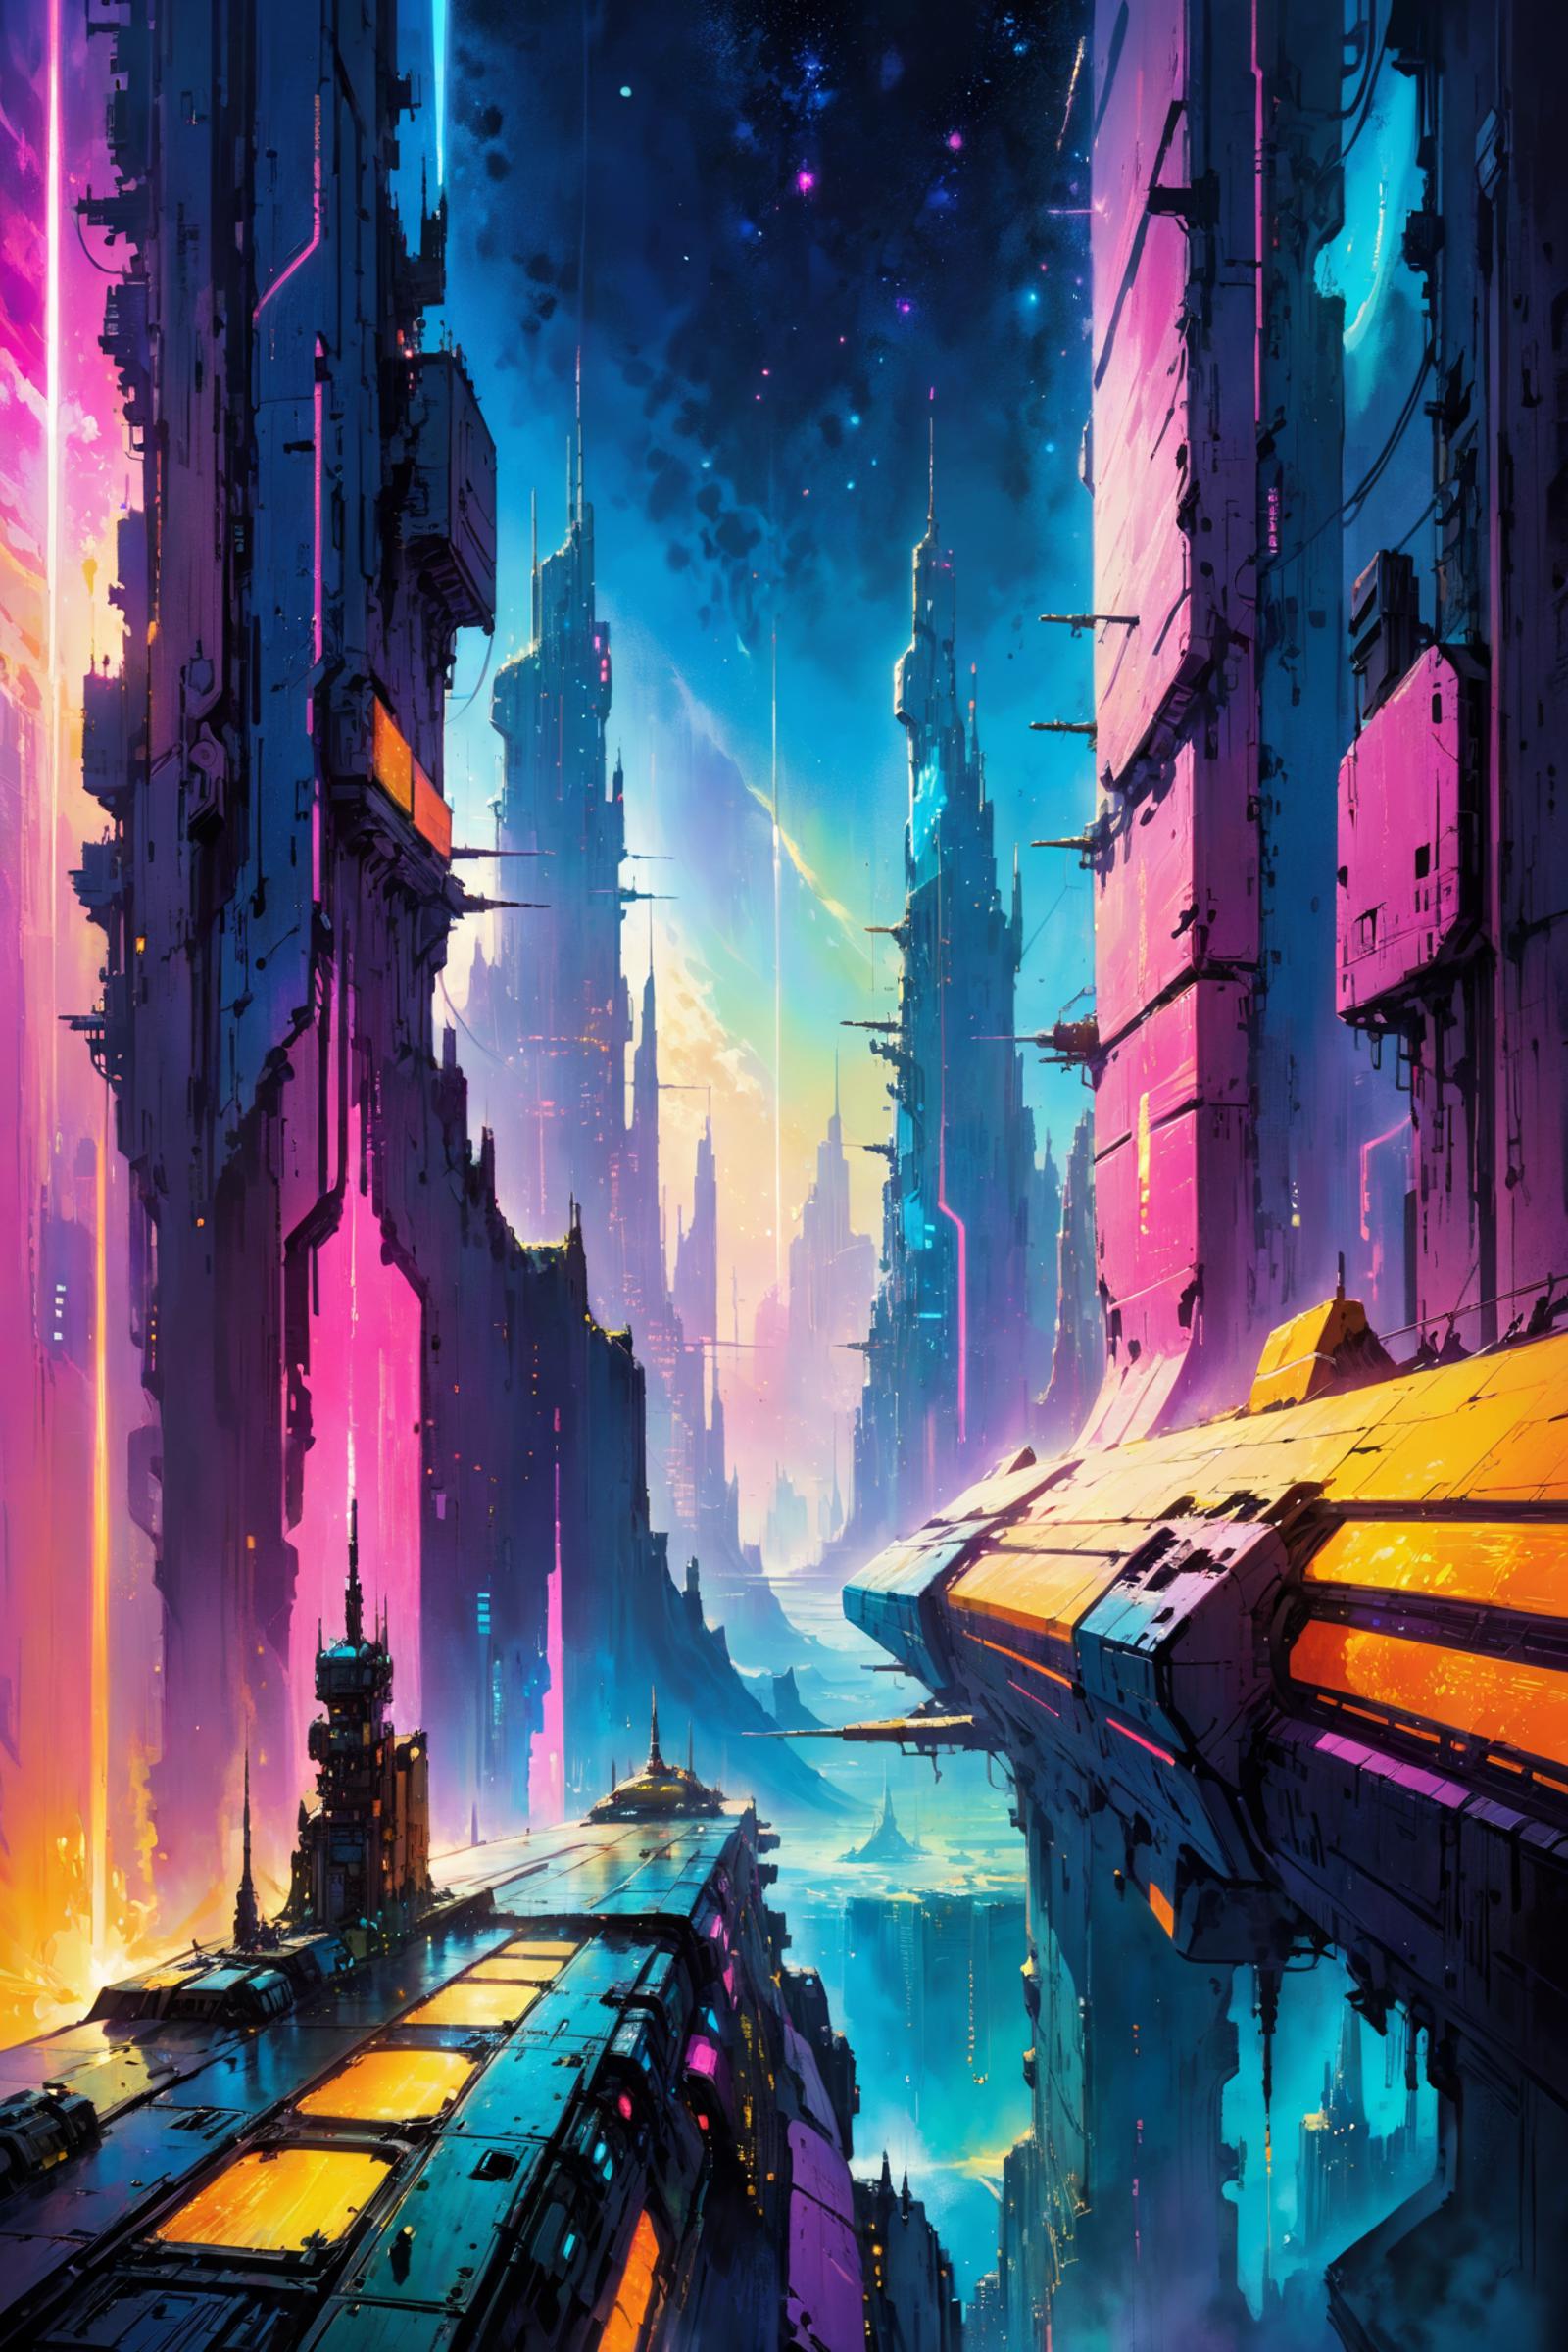 Futuristic City with Tall Towers and a Spacecraft on the Ground in a Pink Sky